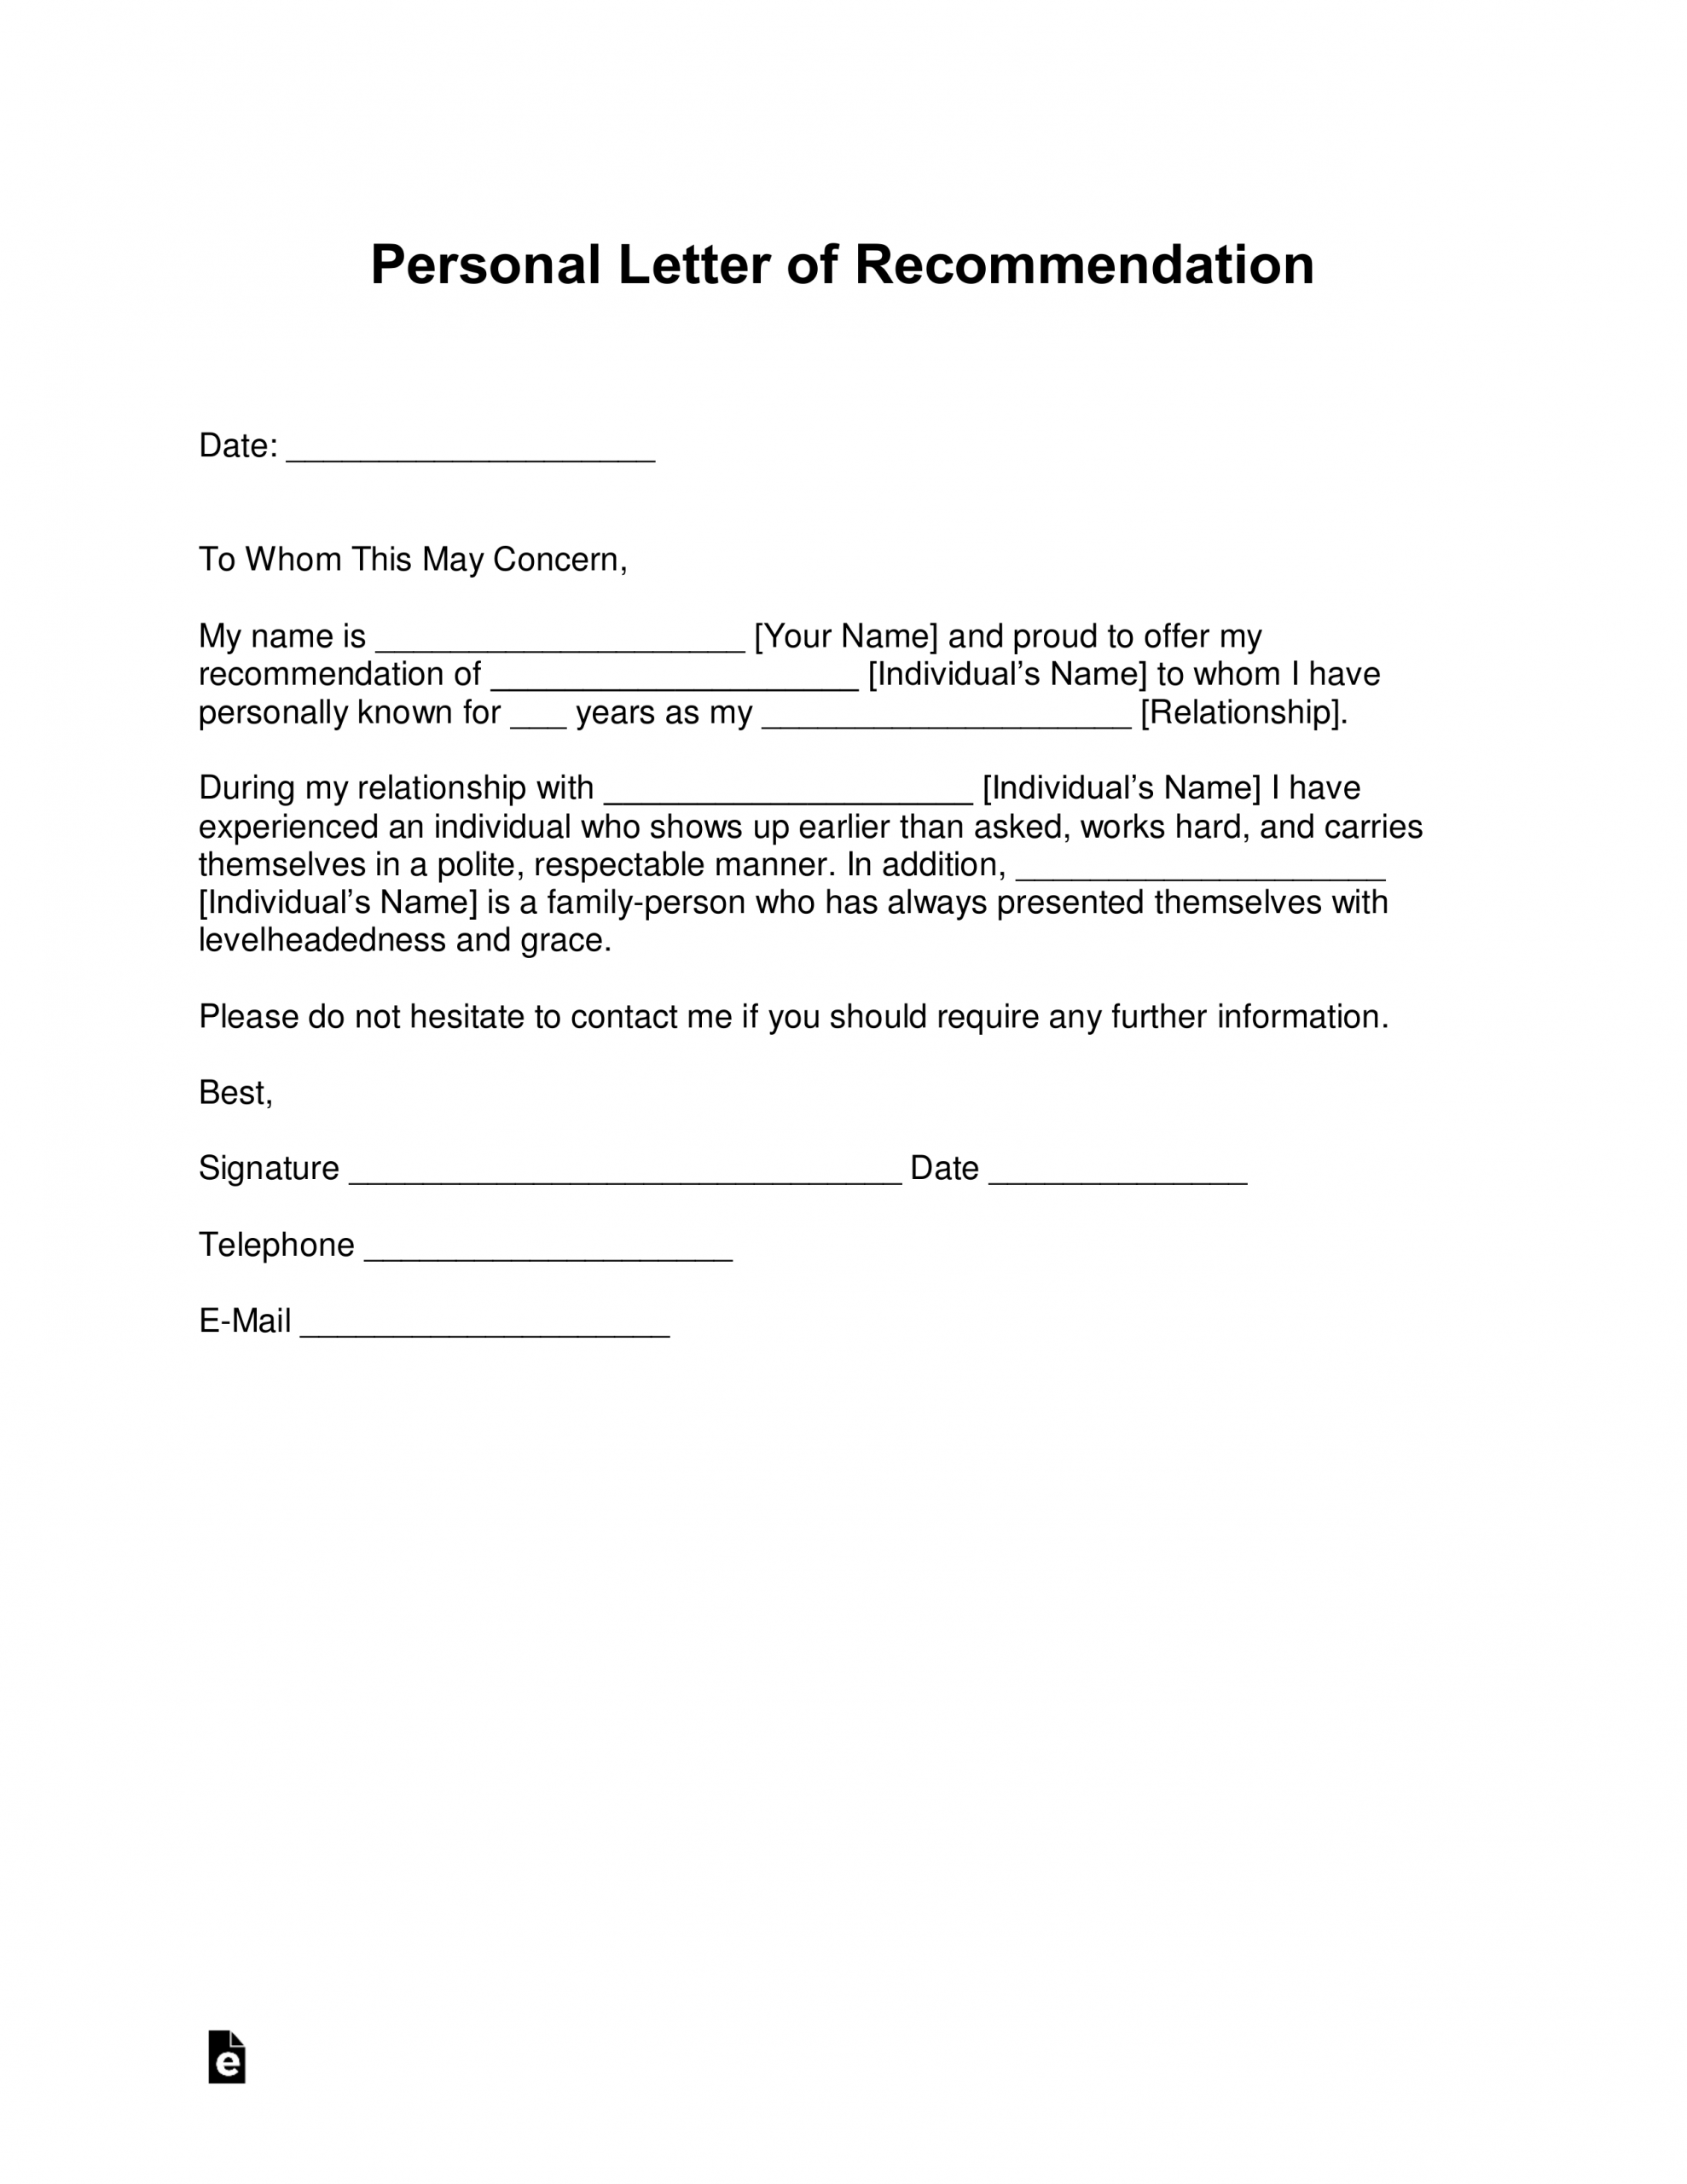 Free Personal Letter Of Recommendation Template For A with regard to dimensions 2550 X 3301